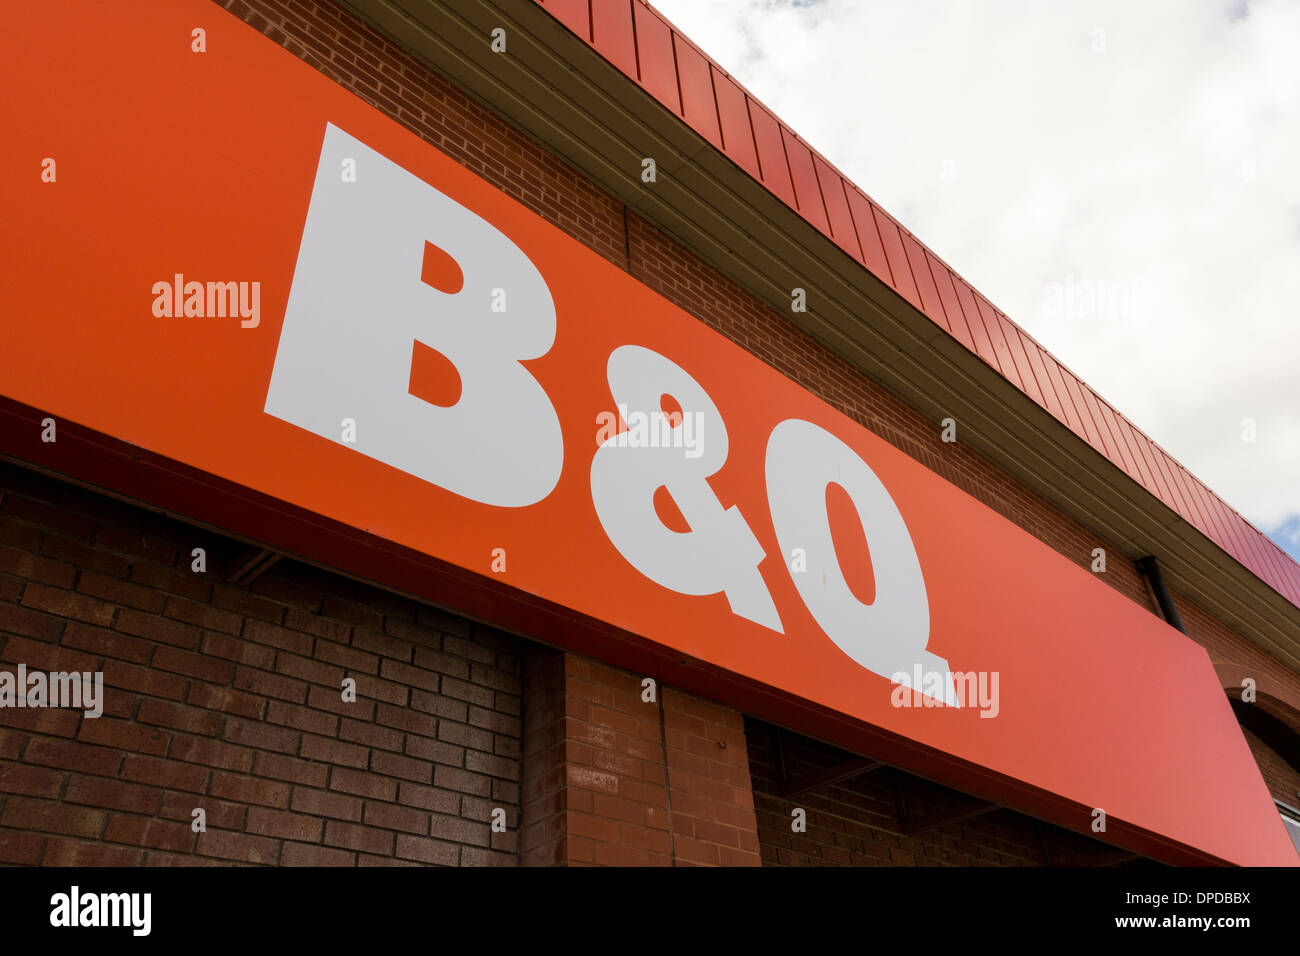 B&Q plc is a British multinational DIY and home improvement retailing company. Stock Photo